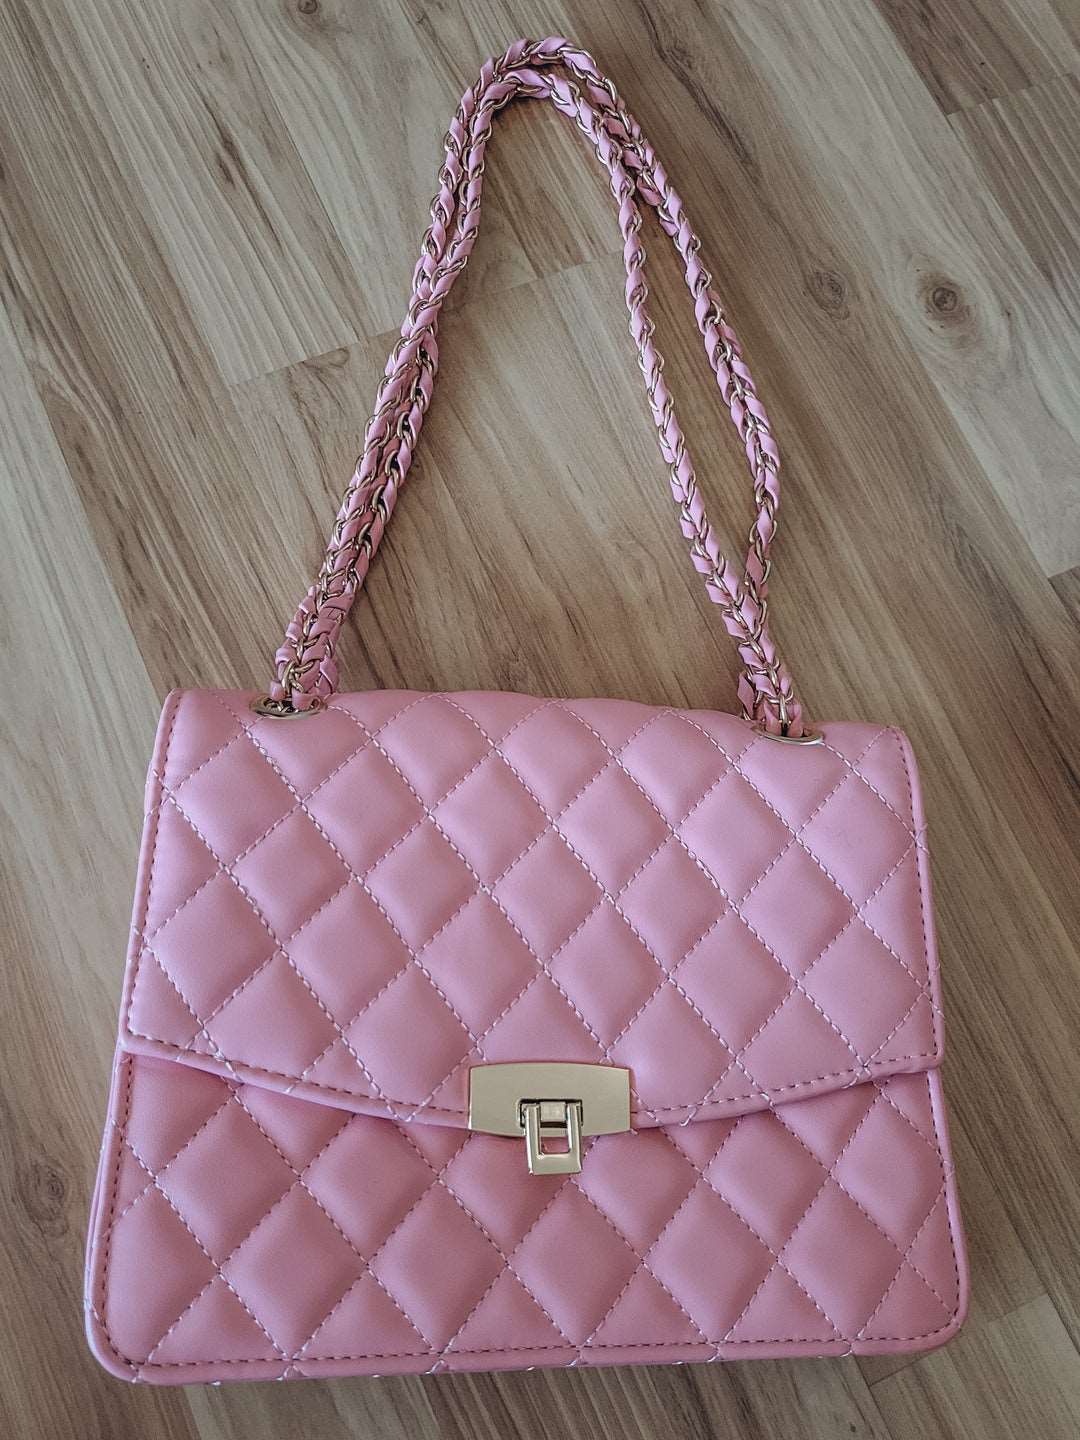 Pink quilted purse with pink and gold chain strap.